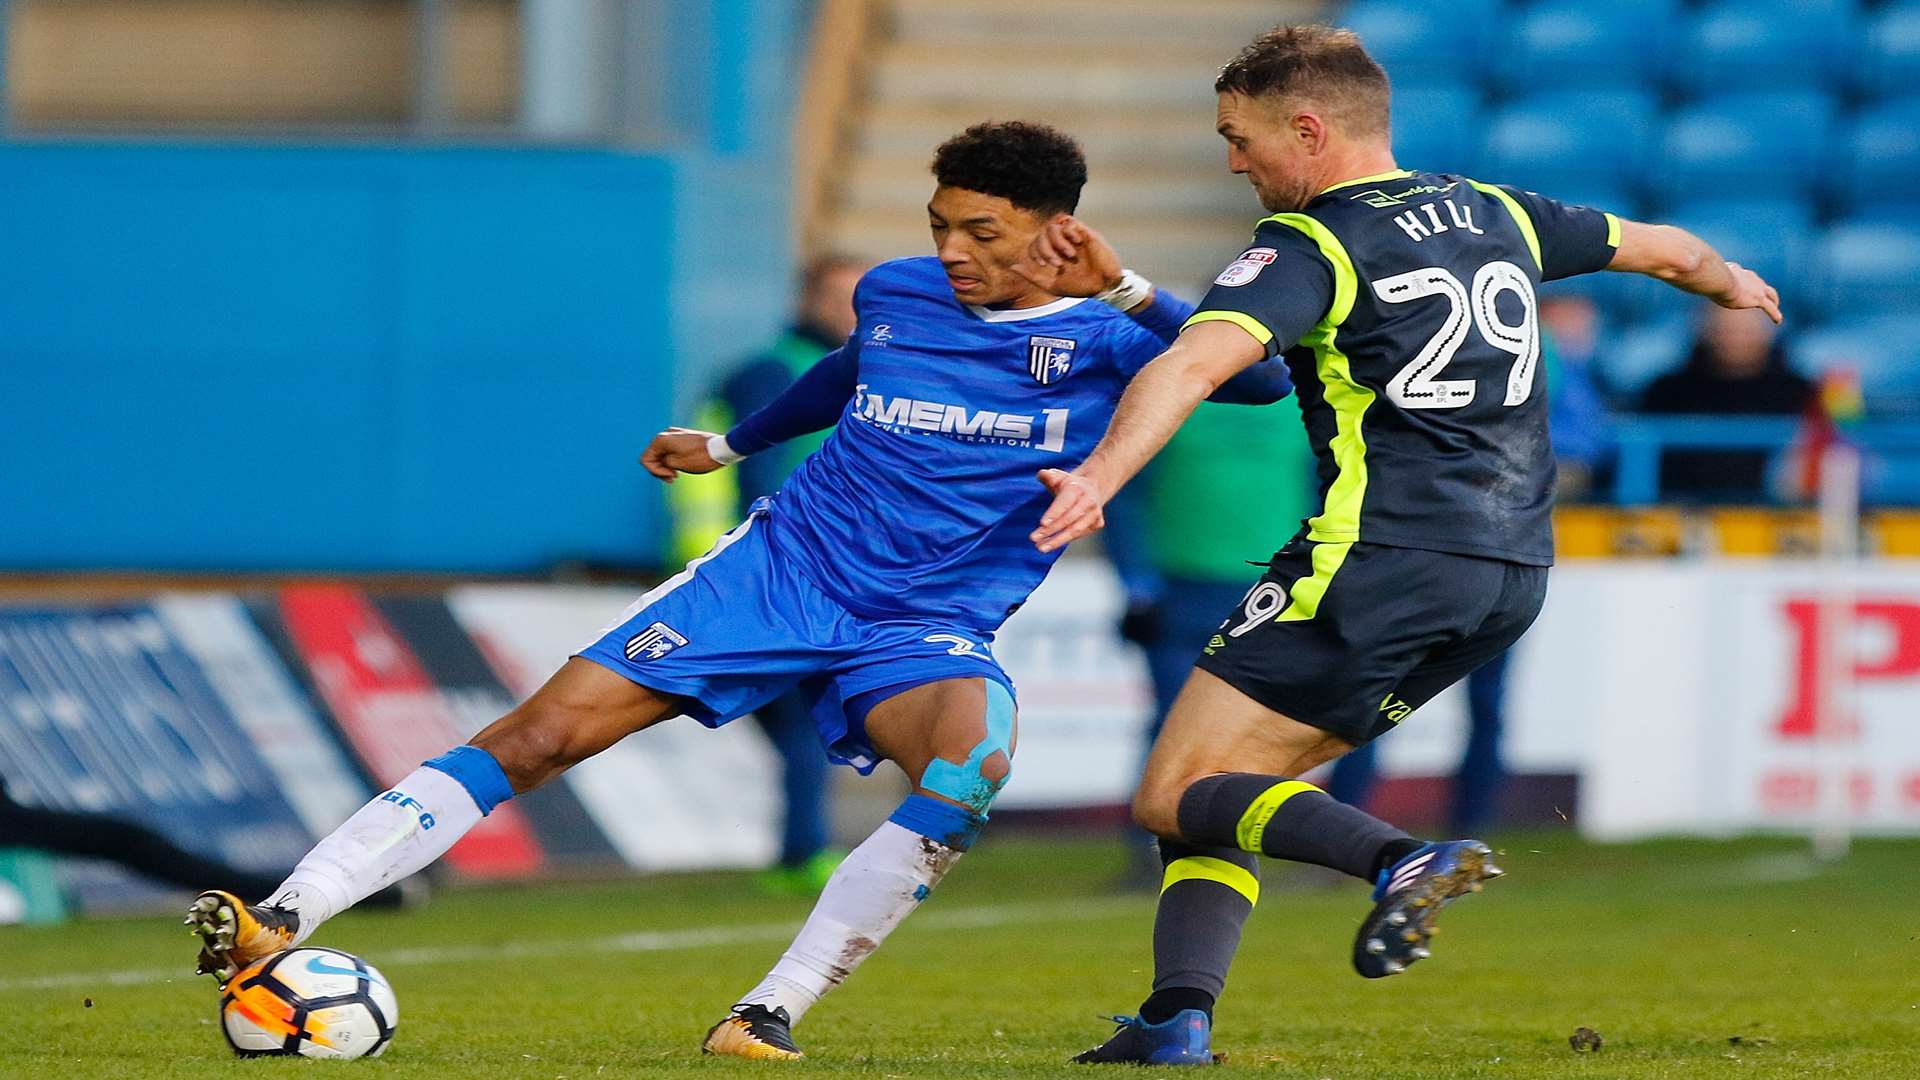 Gills midfielder Sean Clare on the ball against Carlisle on Saturday. Picture: Andy Jones